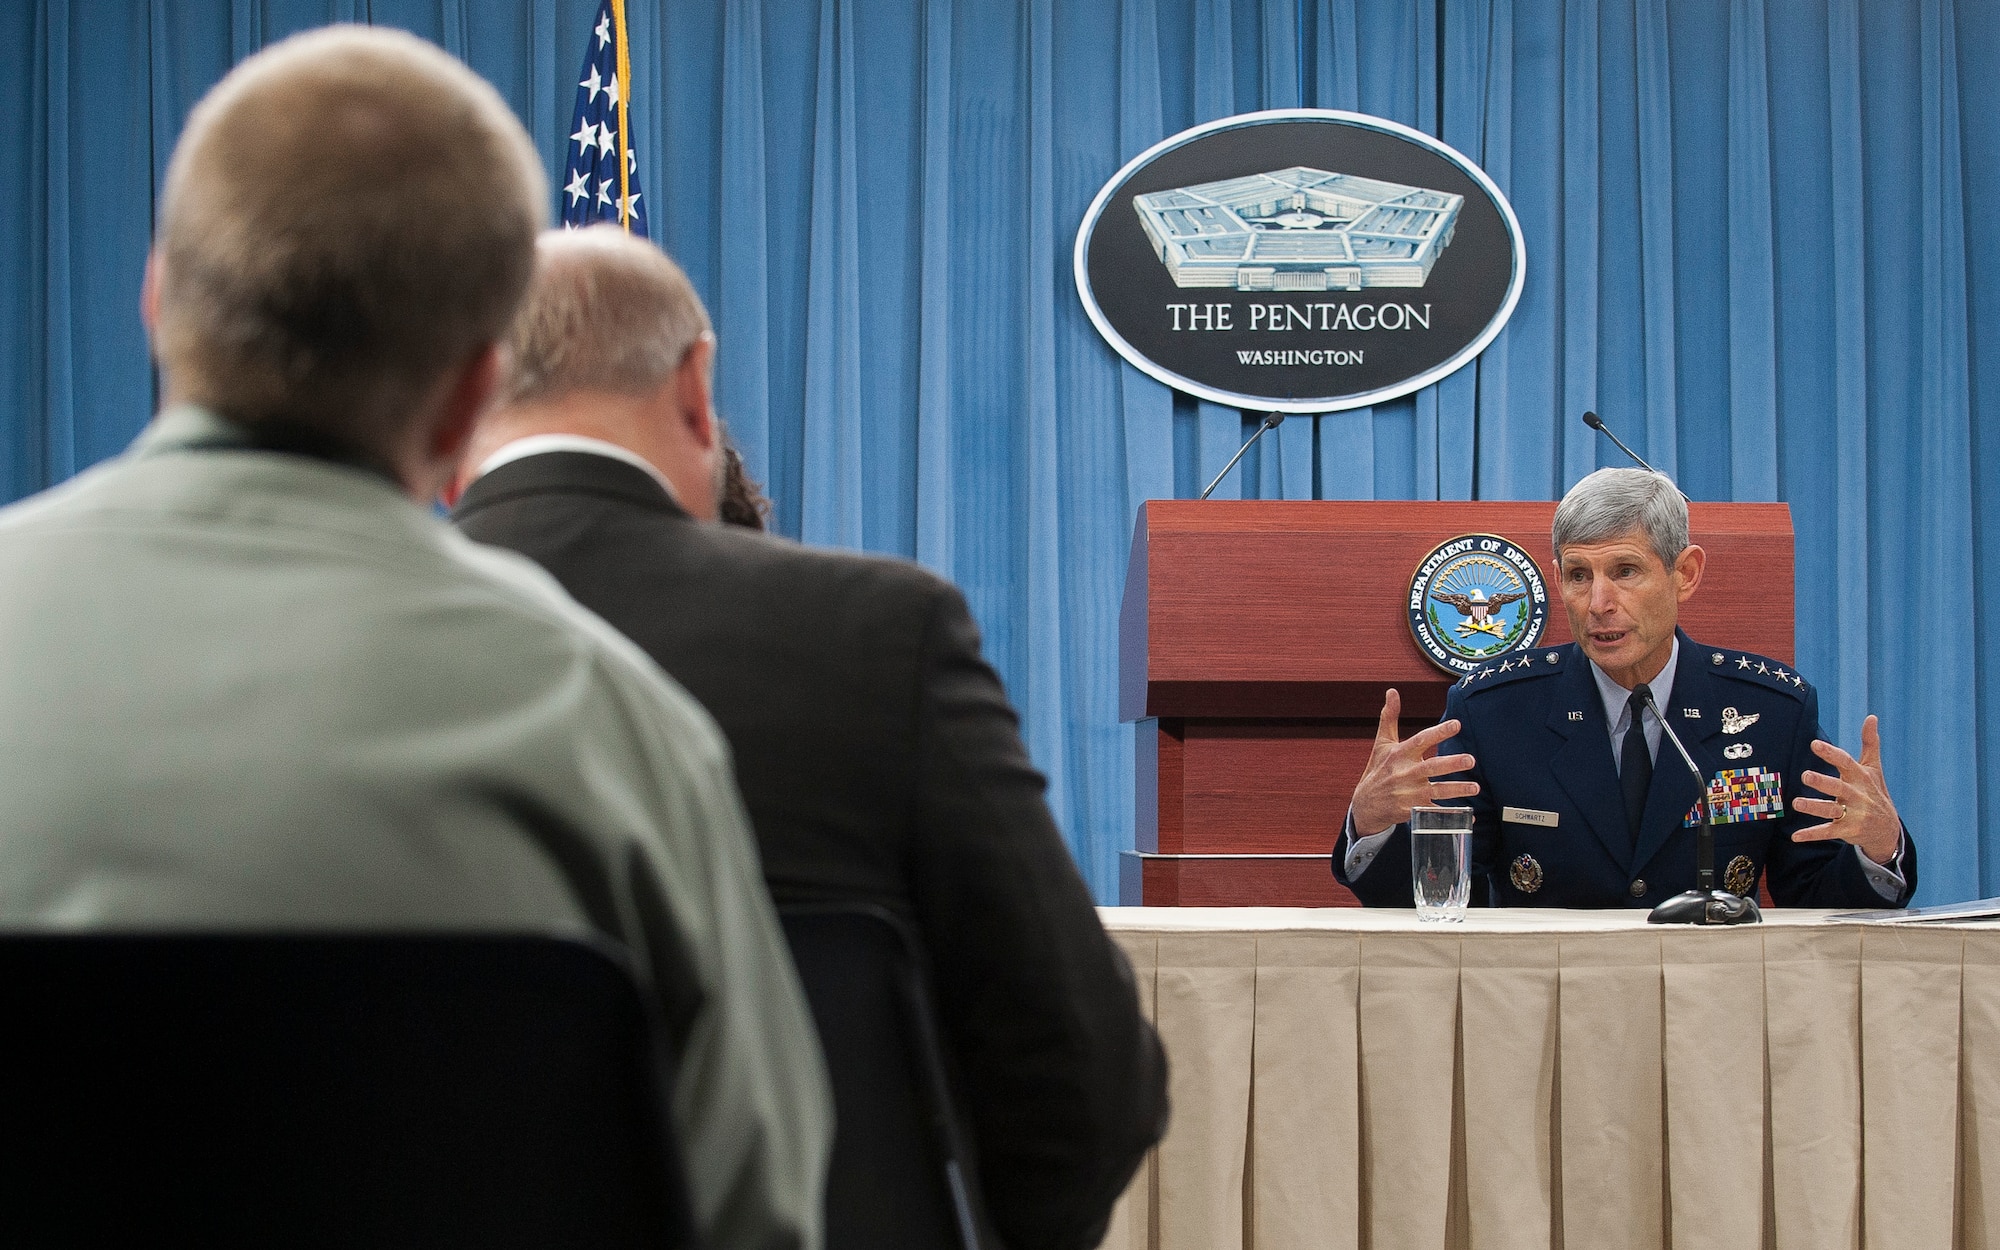 Air Force Chief of Staff Gen. Norton Schwartz responds to questions in the Pentagon on July 24, 2012, during a media availability to discuss Air Force accomplishments during his time as Chief of Staff. Schwartz said the Air Force has data indicating the cause of the F-22 Raptor's hypoxia-related incidents stem from the quantity, not the quality, of oxygen available in the cockpit. (U.S. Air Force photo/James Varhegyi)